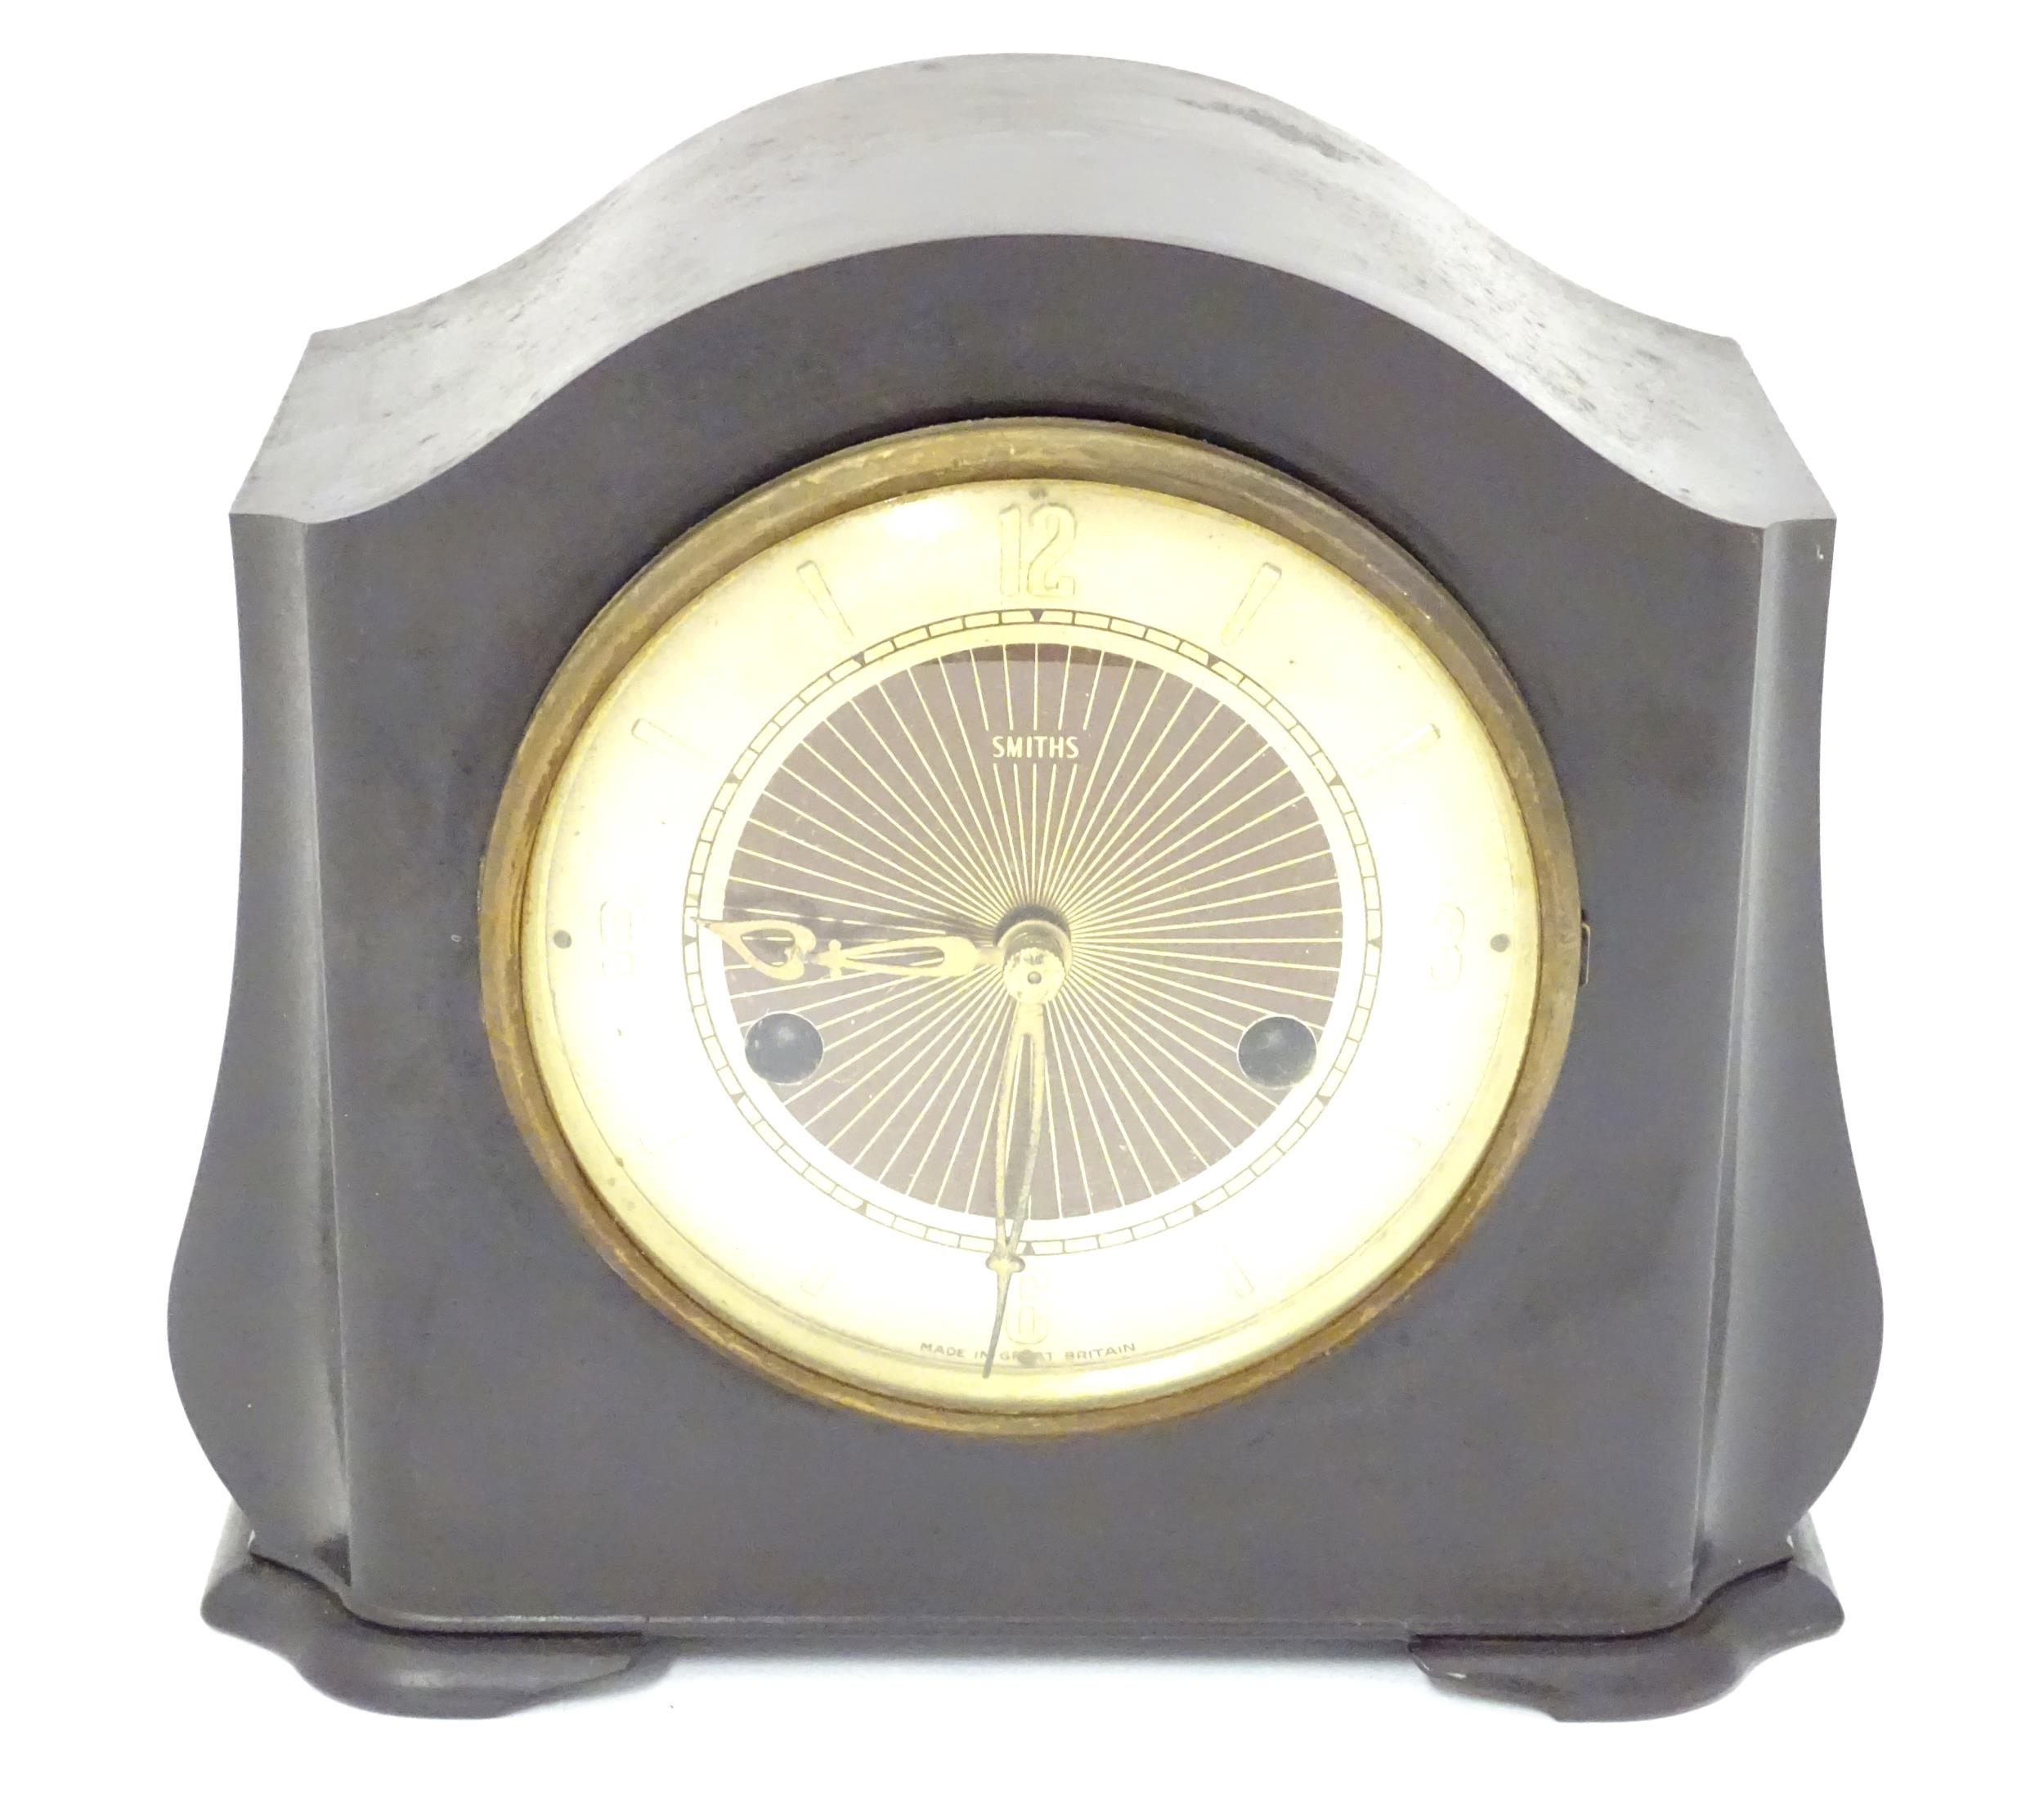 A Bakelite cased mantel clock by Smiths. 7 1/4" high Please Note - we do not make reference to the